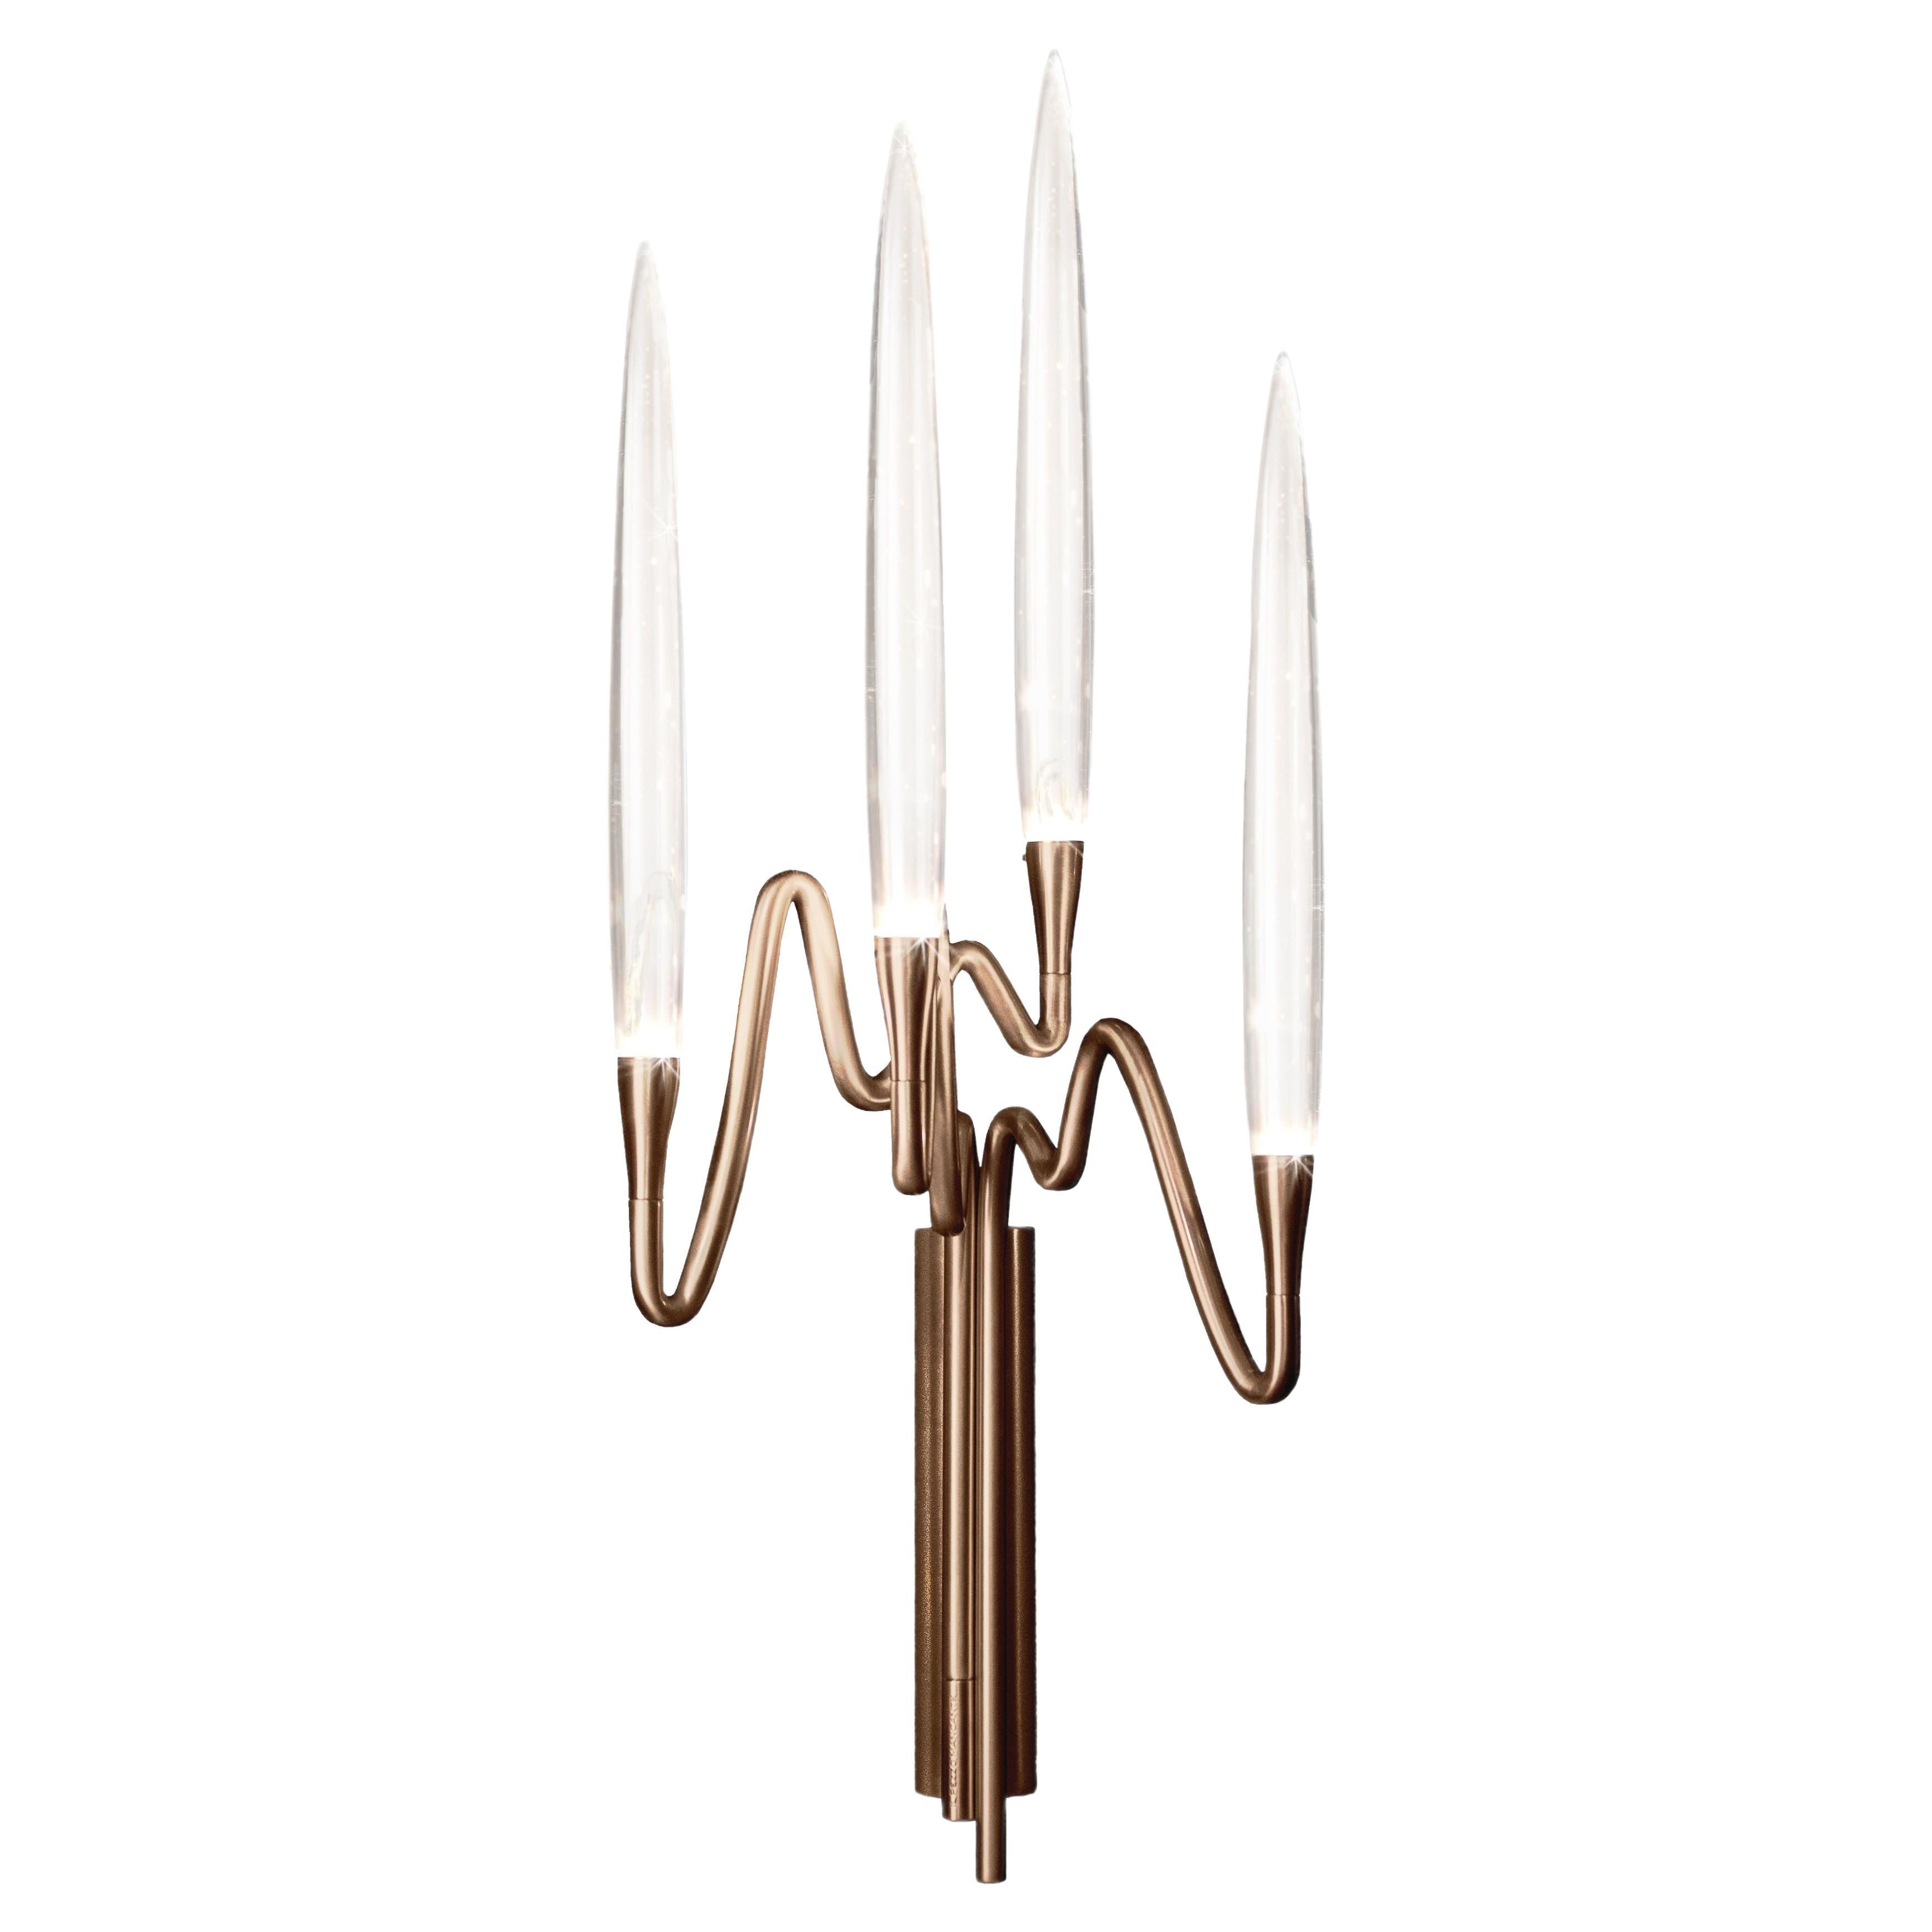 "Il Pezzo 3 Wall Sconce" - width 27cm/10.3" - bronze - crystal - LEDs For Sale